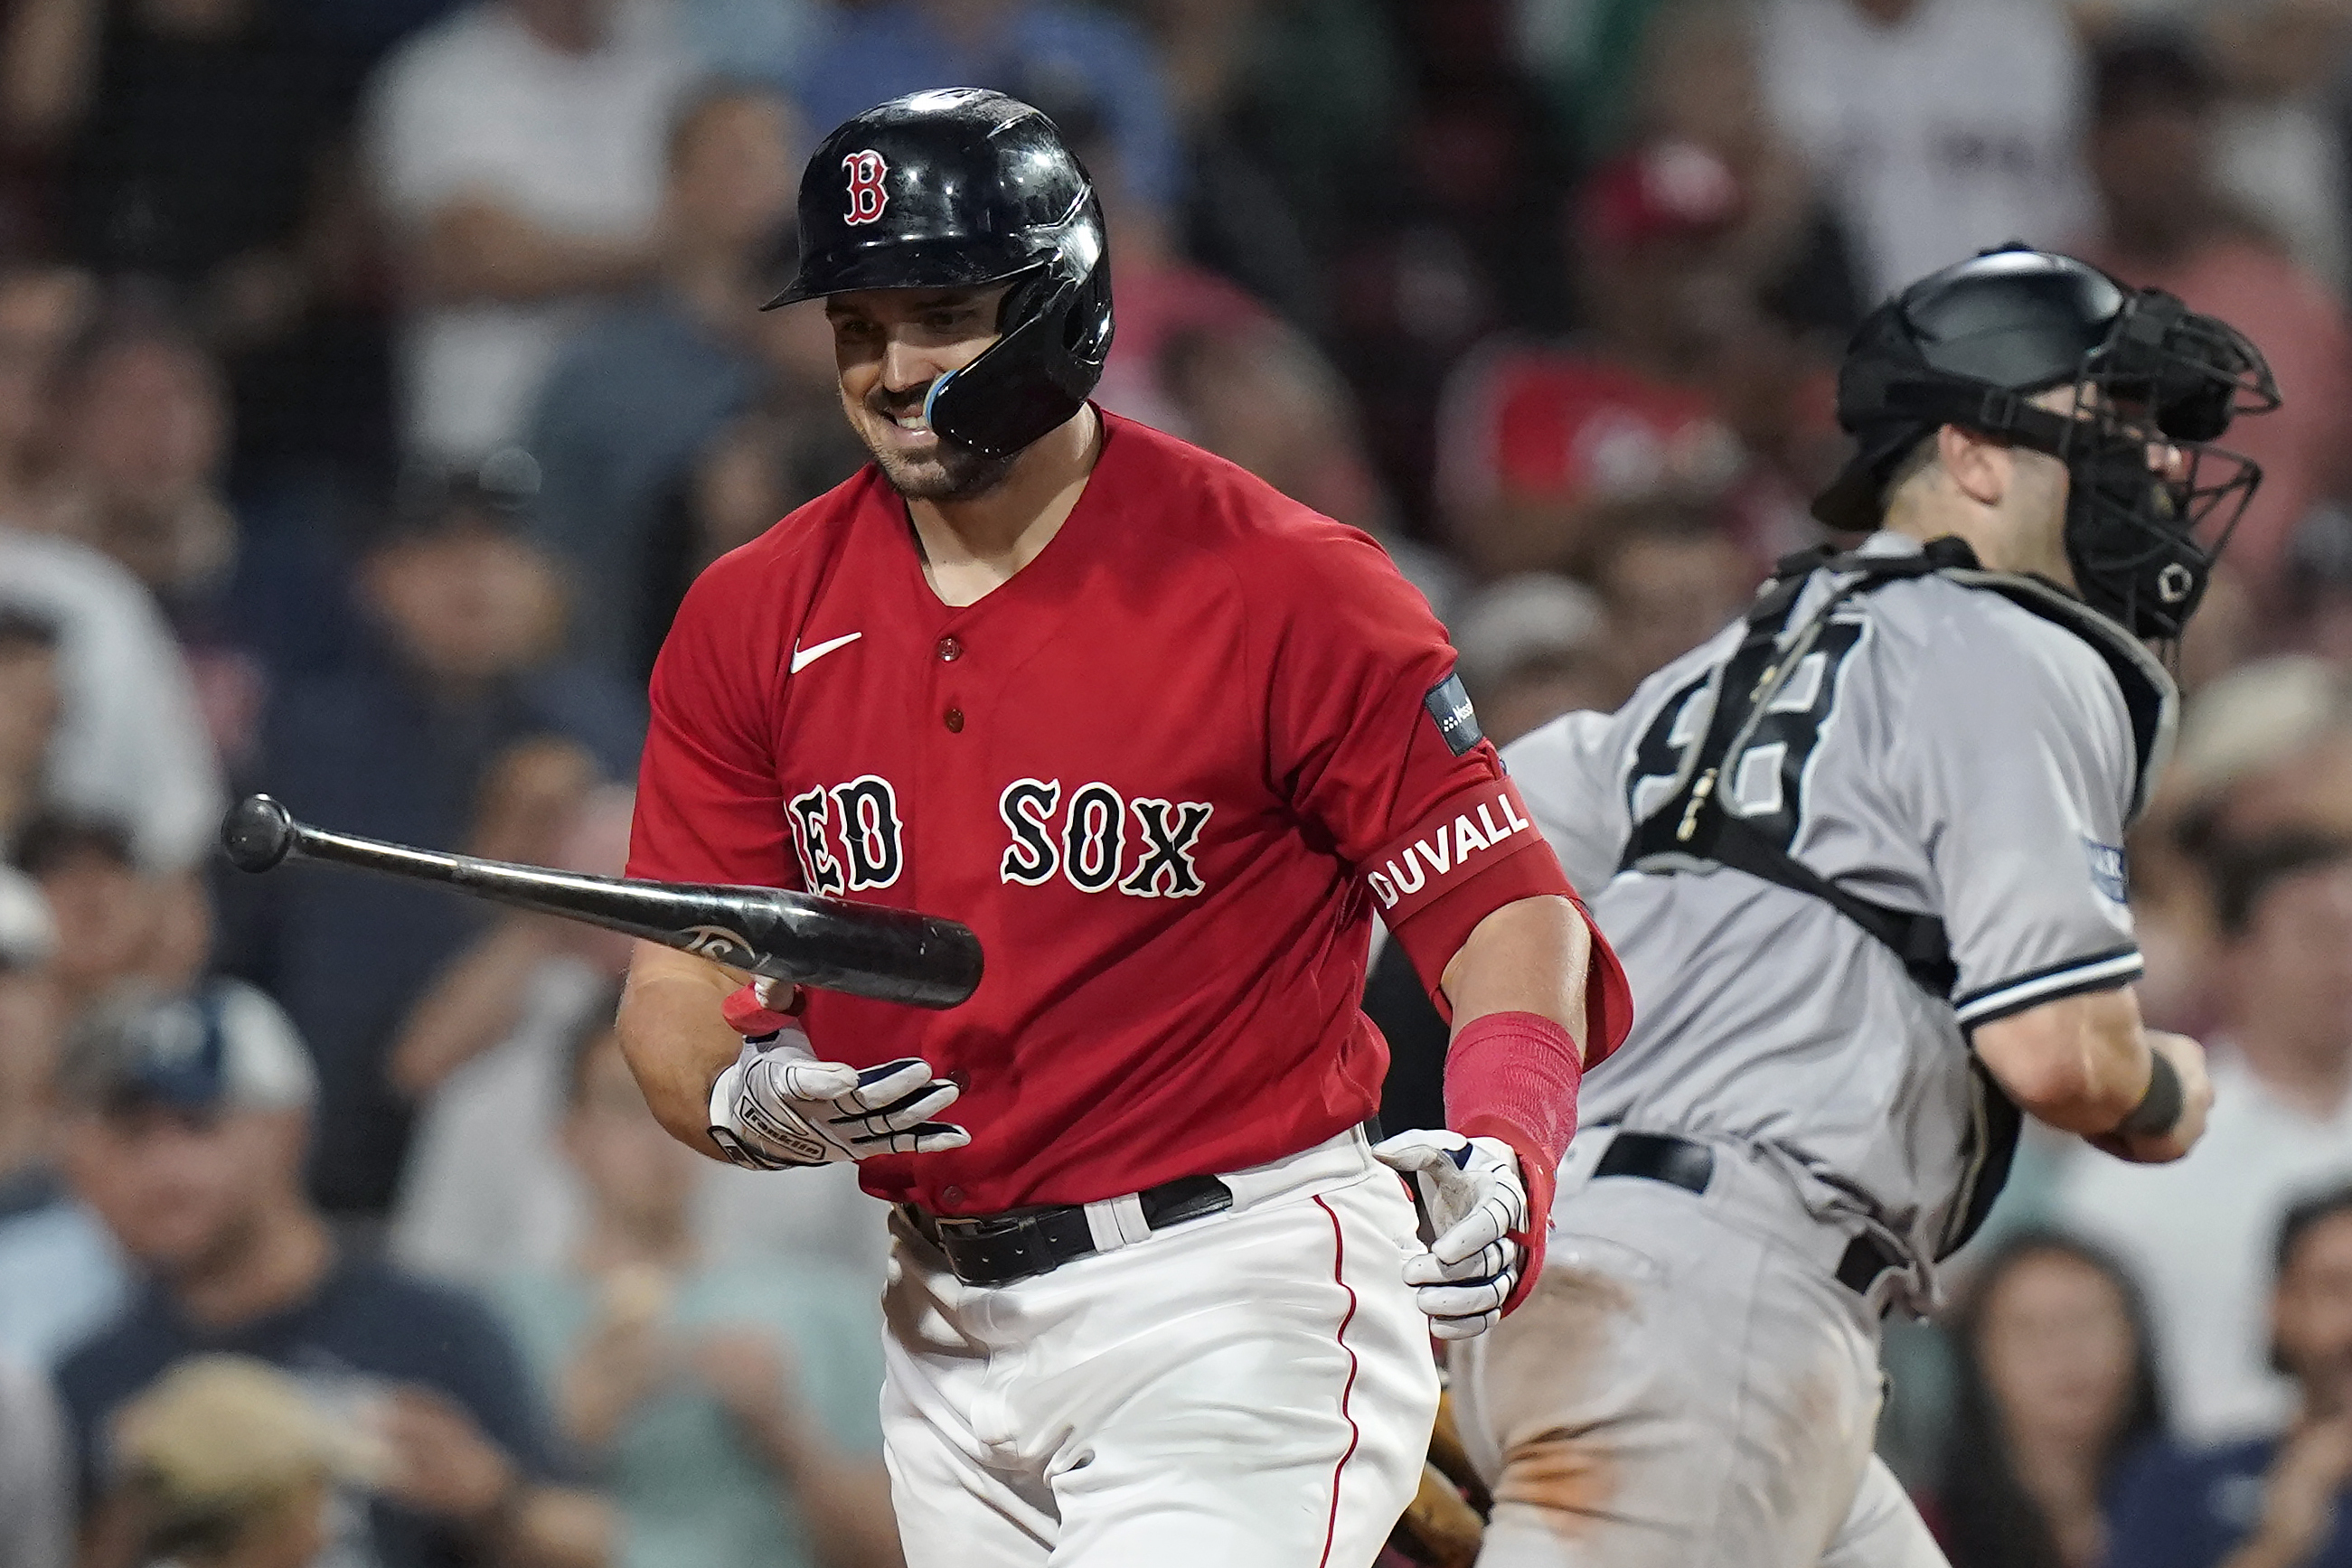 Adam Duvall and the Red Sox bats stay hot to take first series of